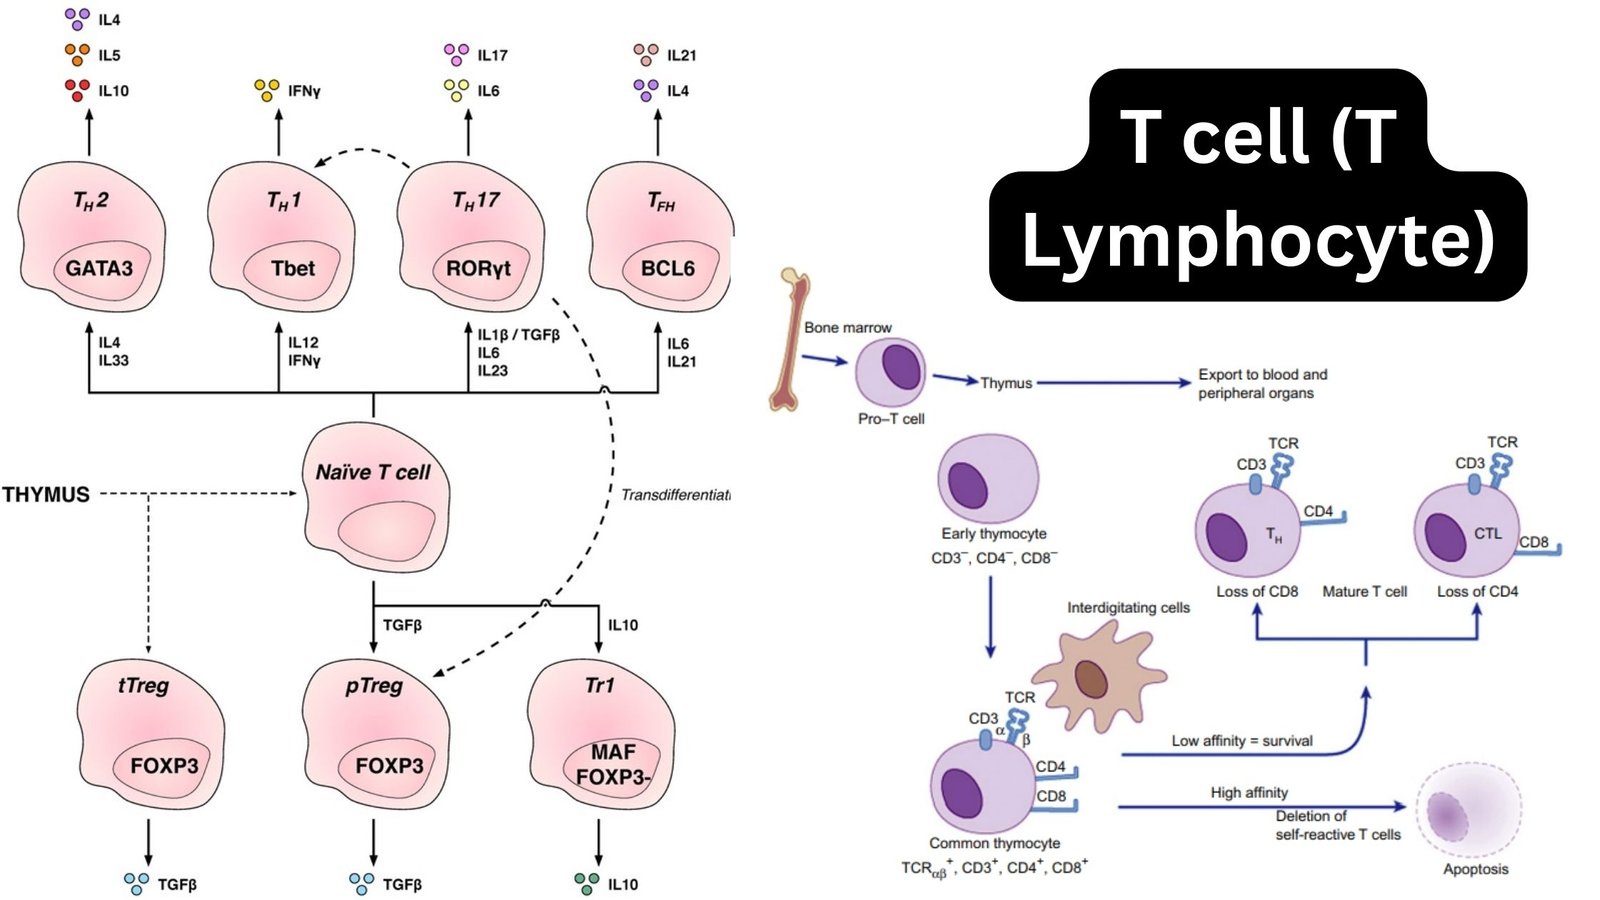 T cell (T Lymphocyte) - Definition, Structure, Types, Development, Functions